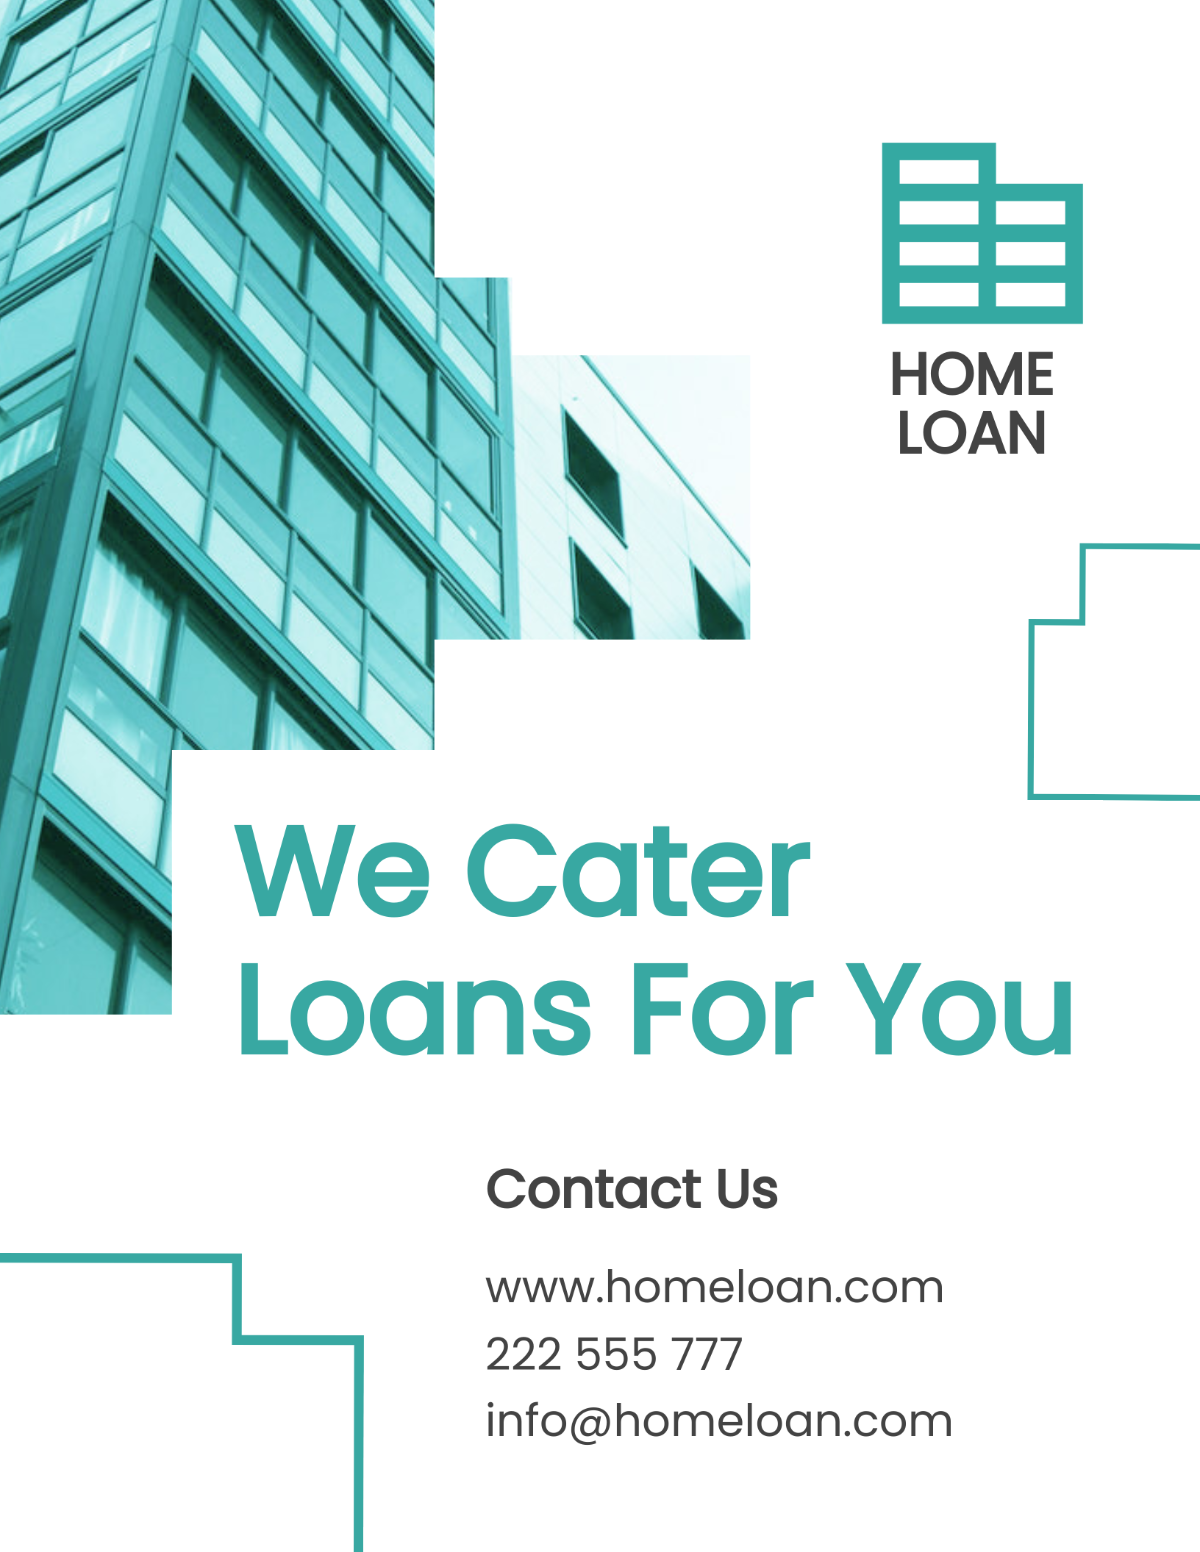 Home/House Loan Flyer Template